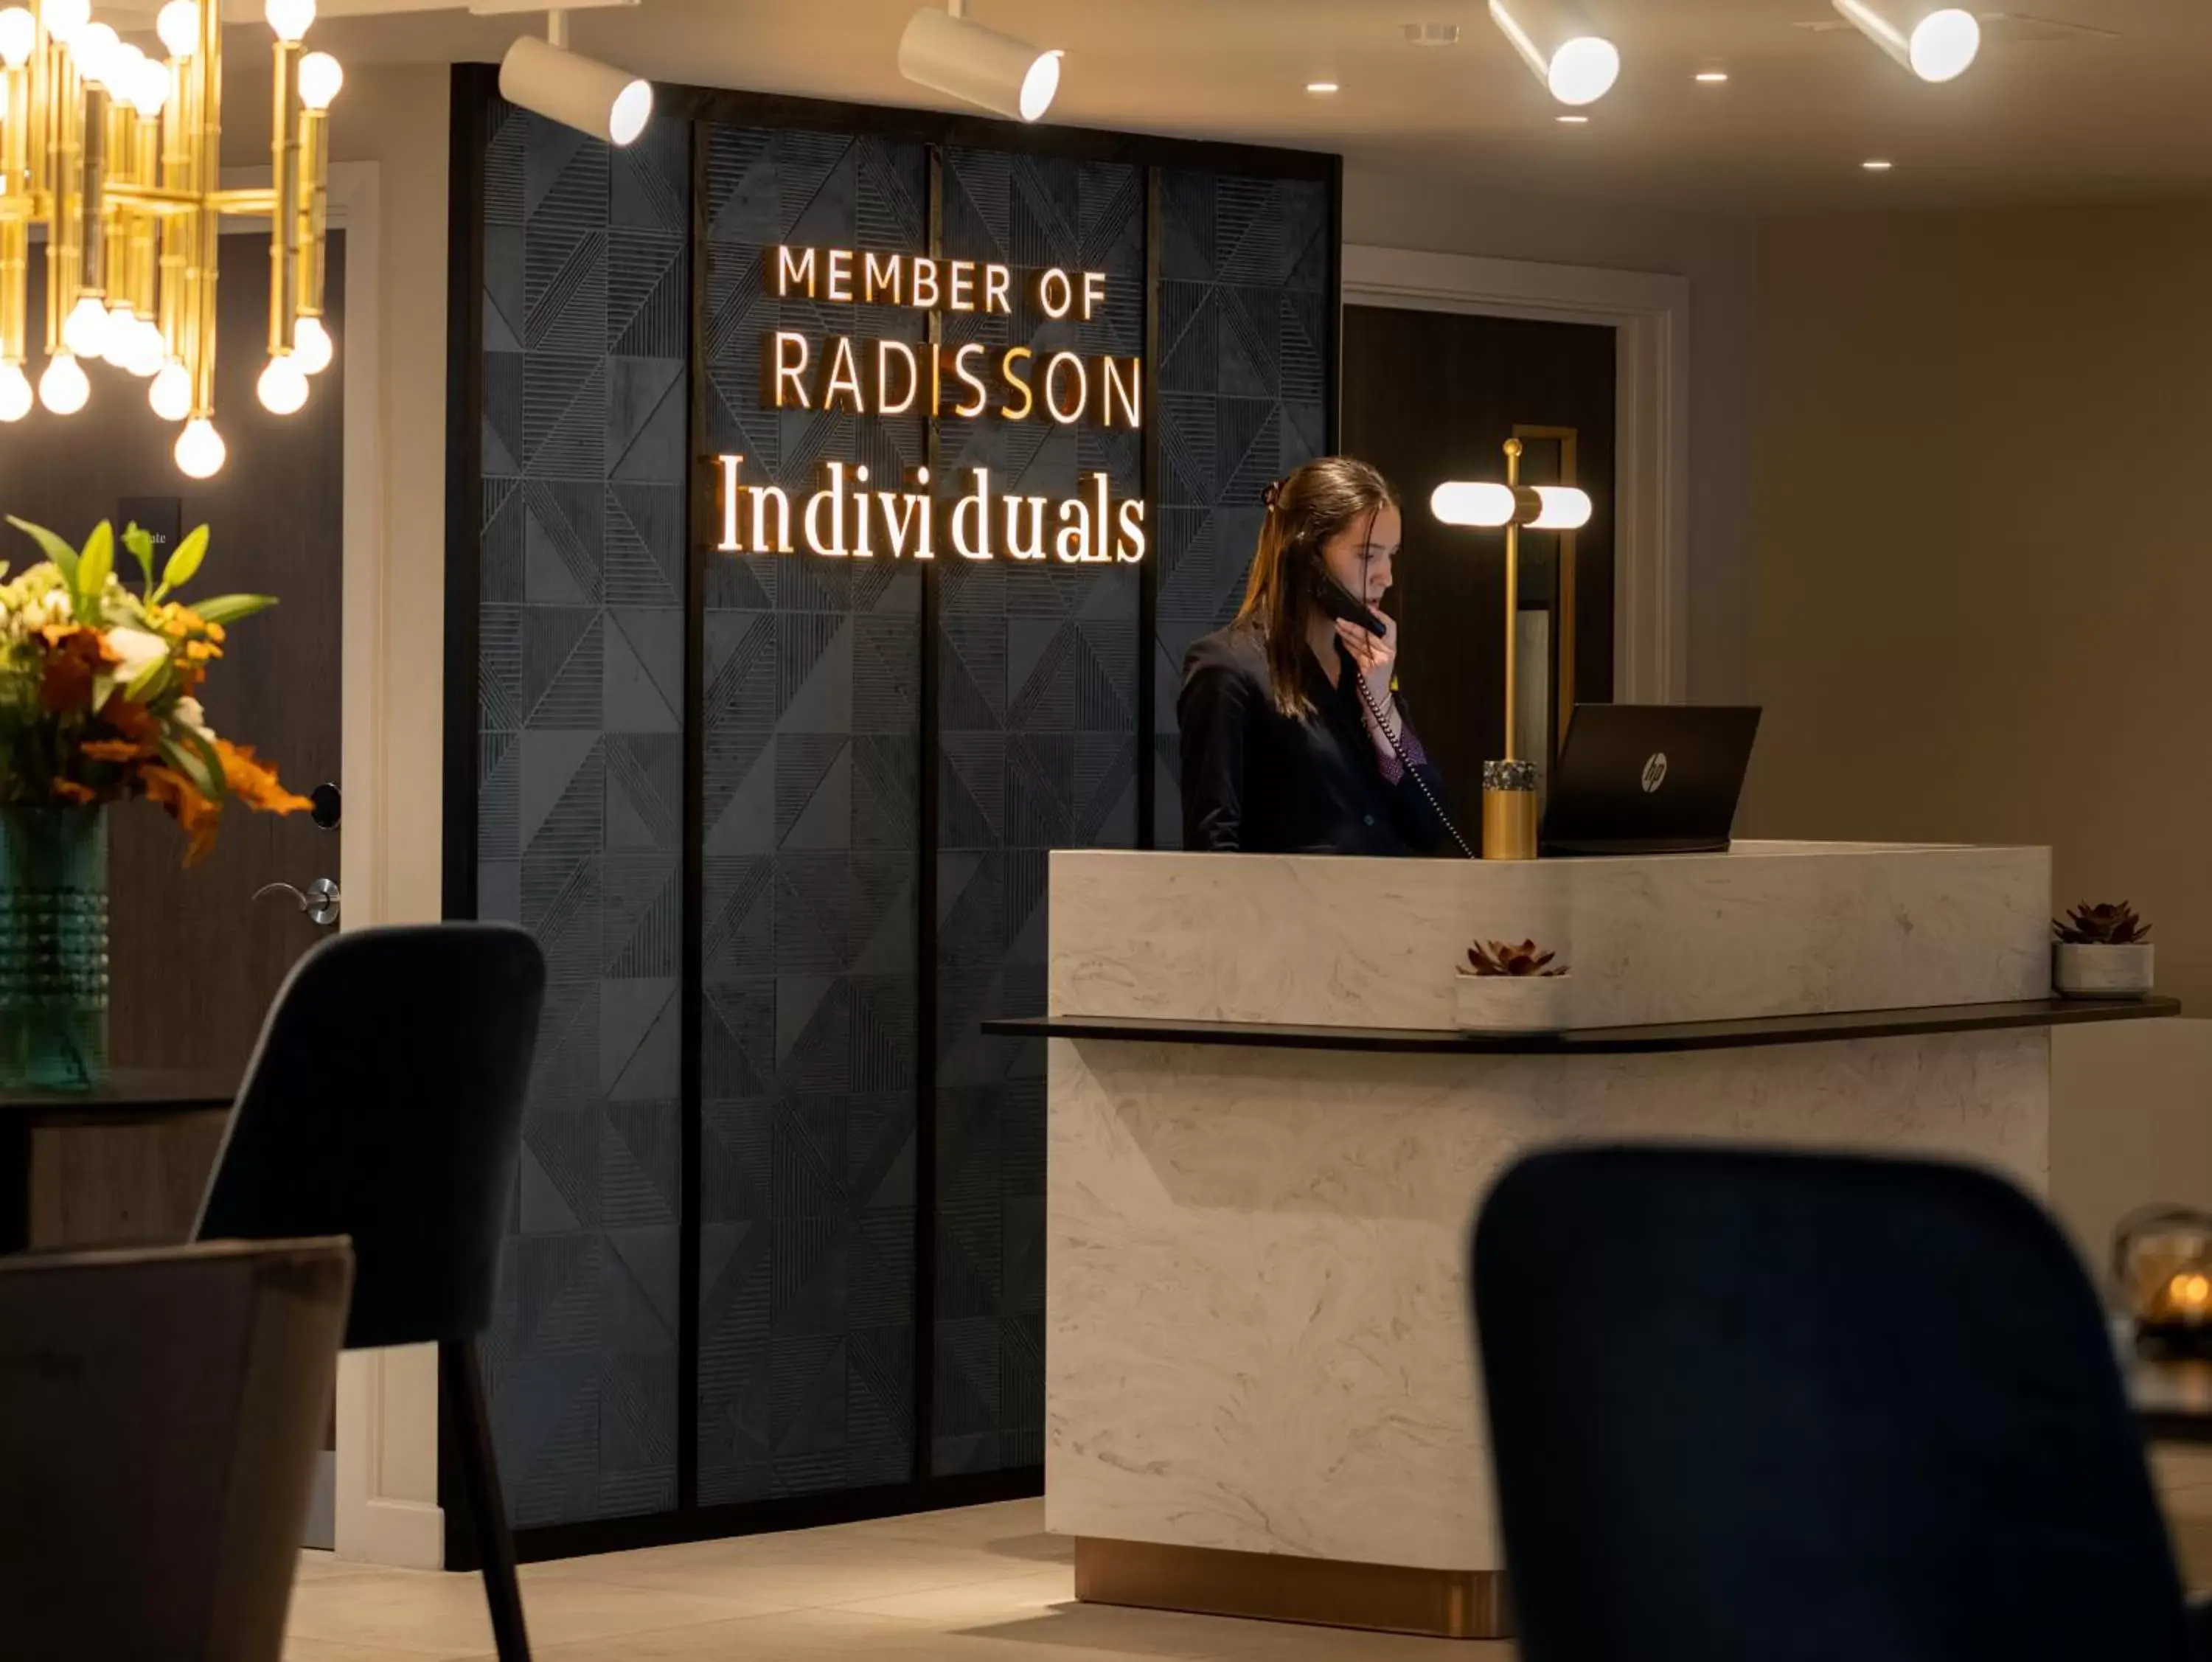 Property building, Lobby/Reception in River Ness Hotel, a member of Radisson Individuals